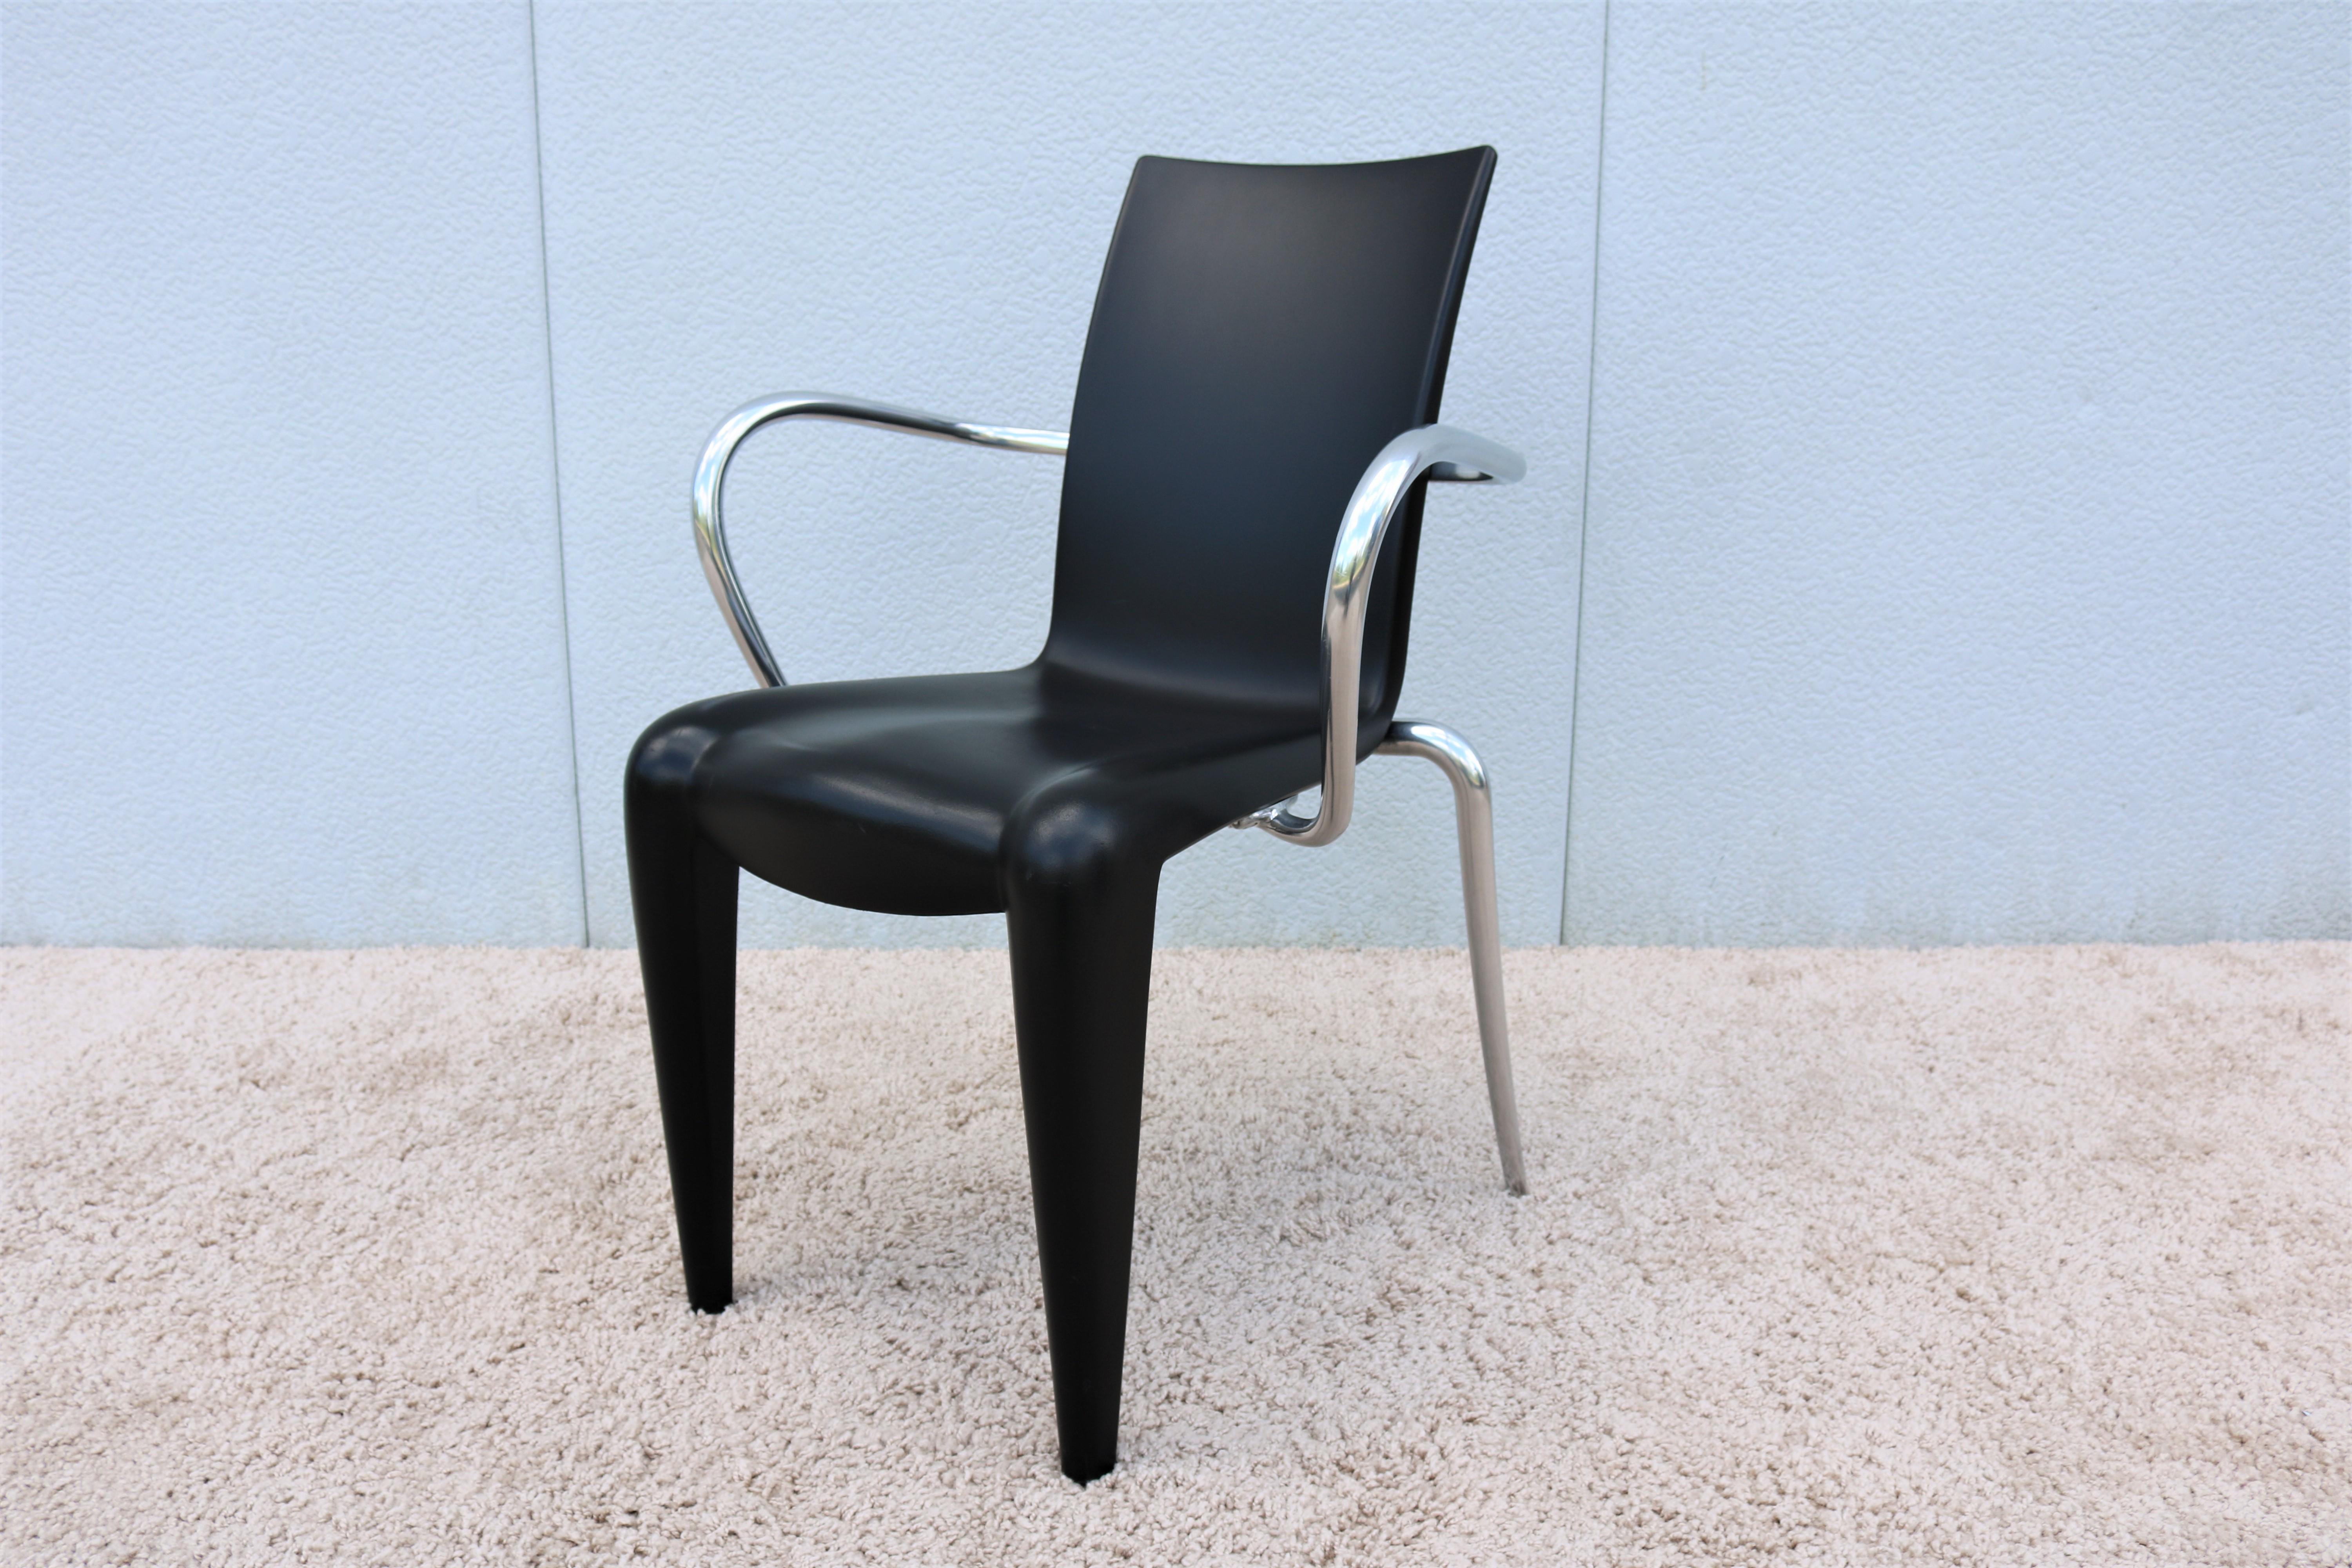 Philippe Starck is regarded as the leading French figure in the area of new design in the eighties.
In 1991 he designed the Louis 20 chair with the characteristic Starck front curve, have sensual appealing forms.
The voluminous hollow front legs and